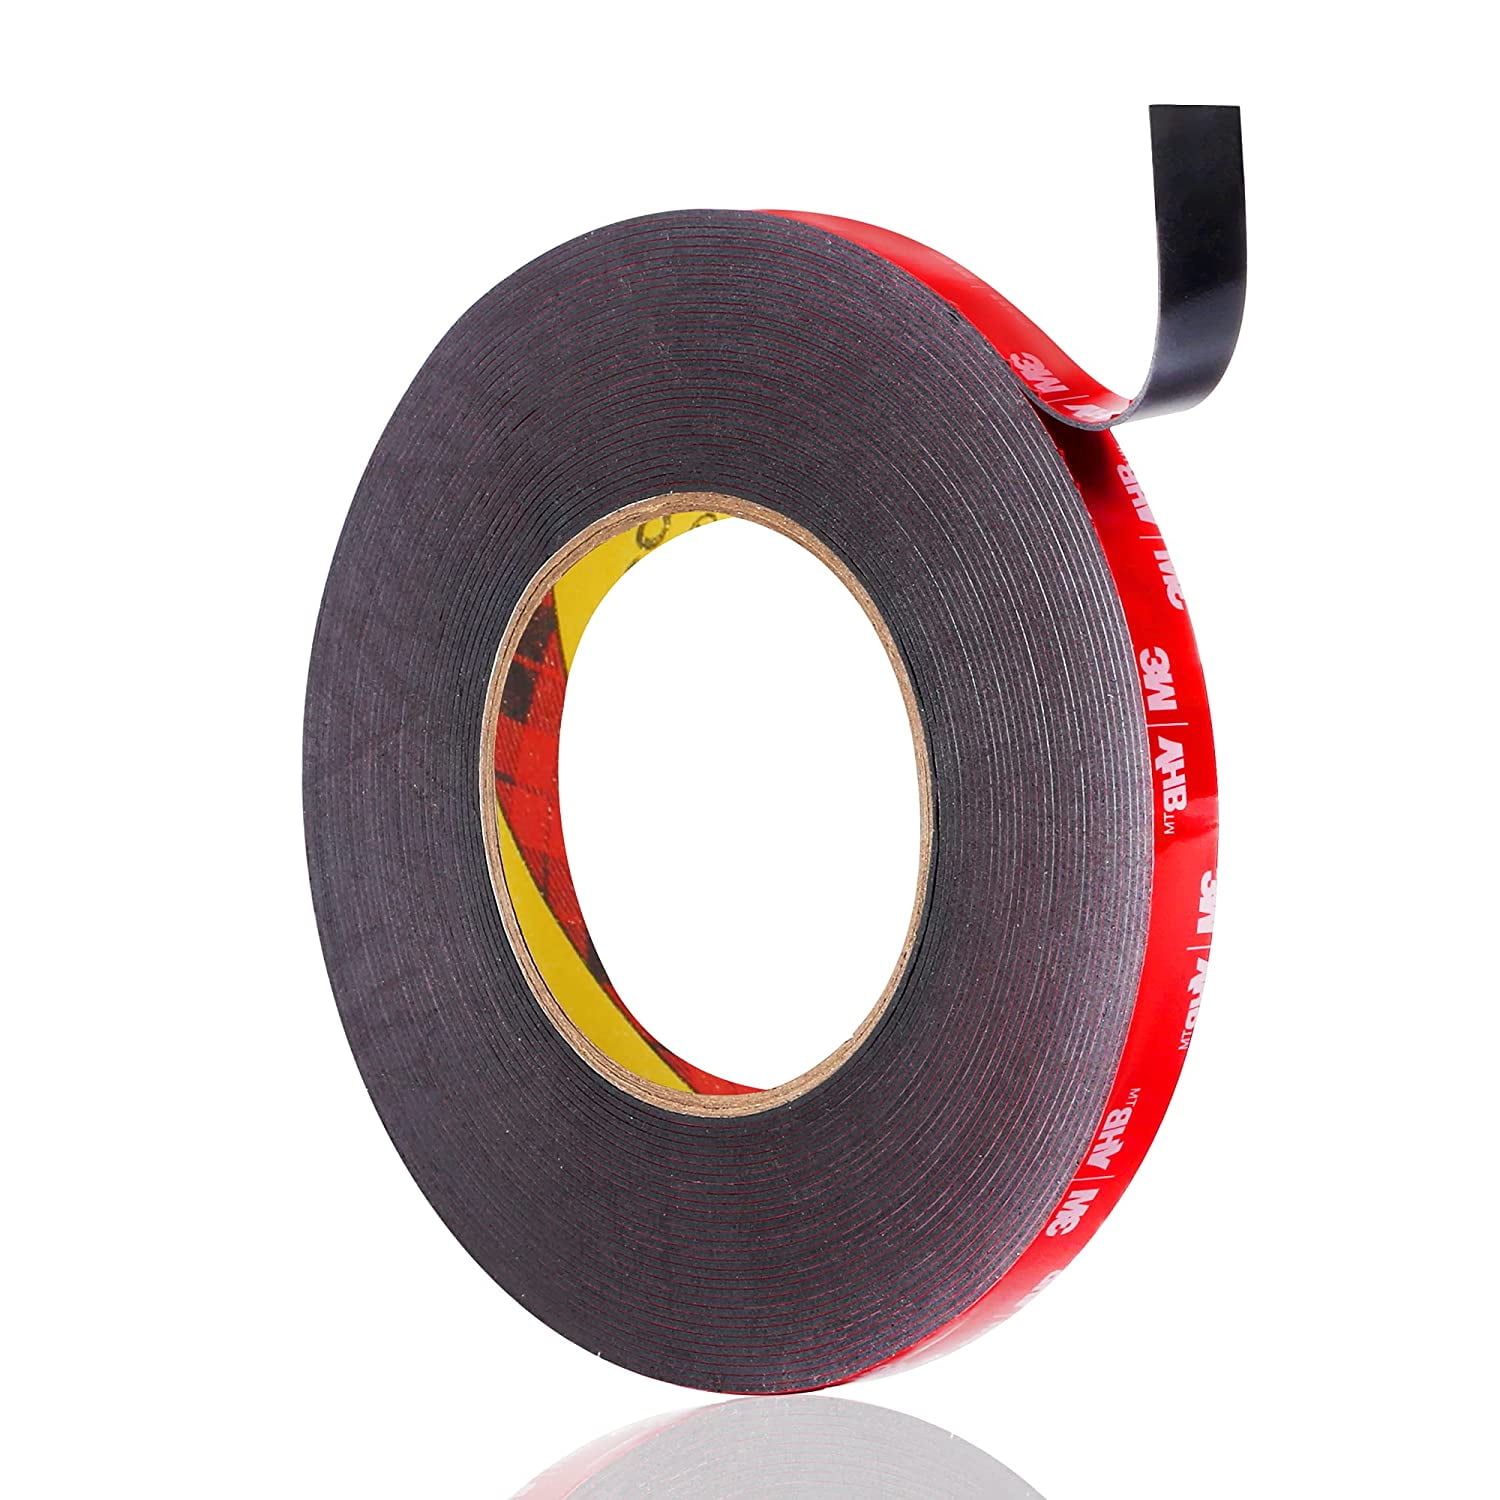 Gorilla Tough & Clear Double-Sided Mounting Tape, 60 Roll